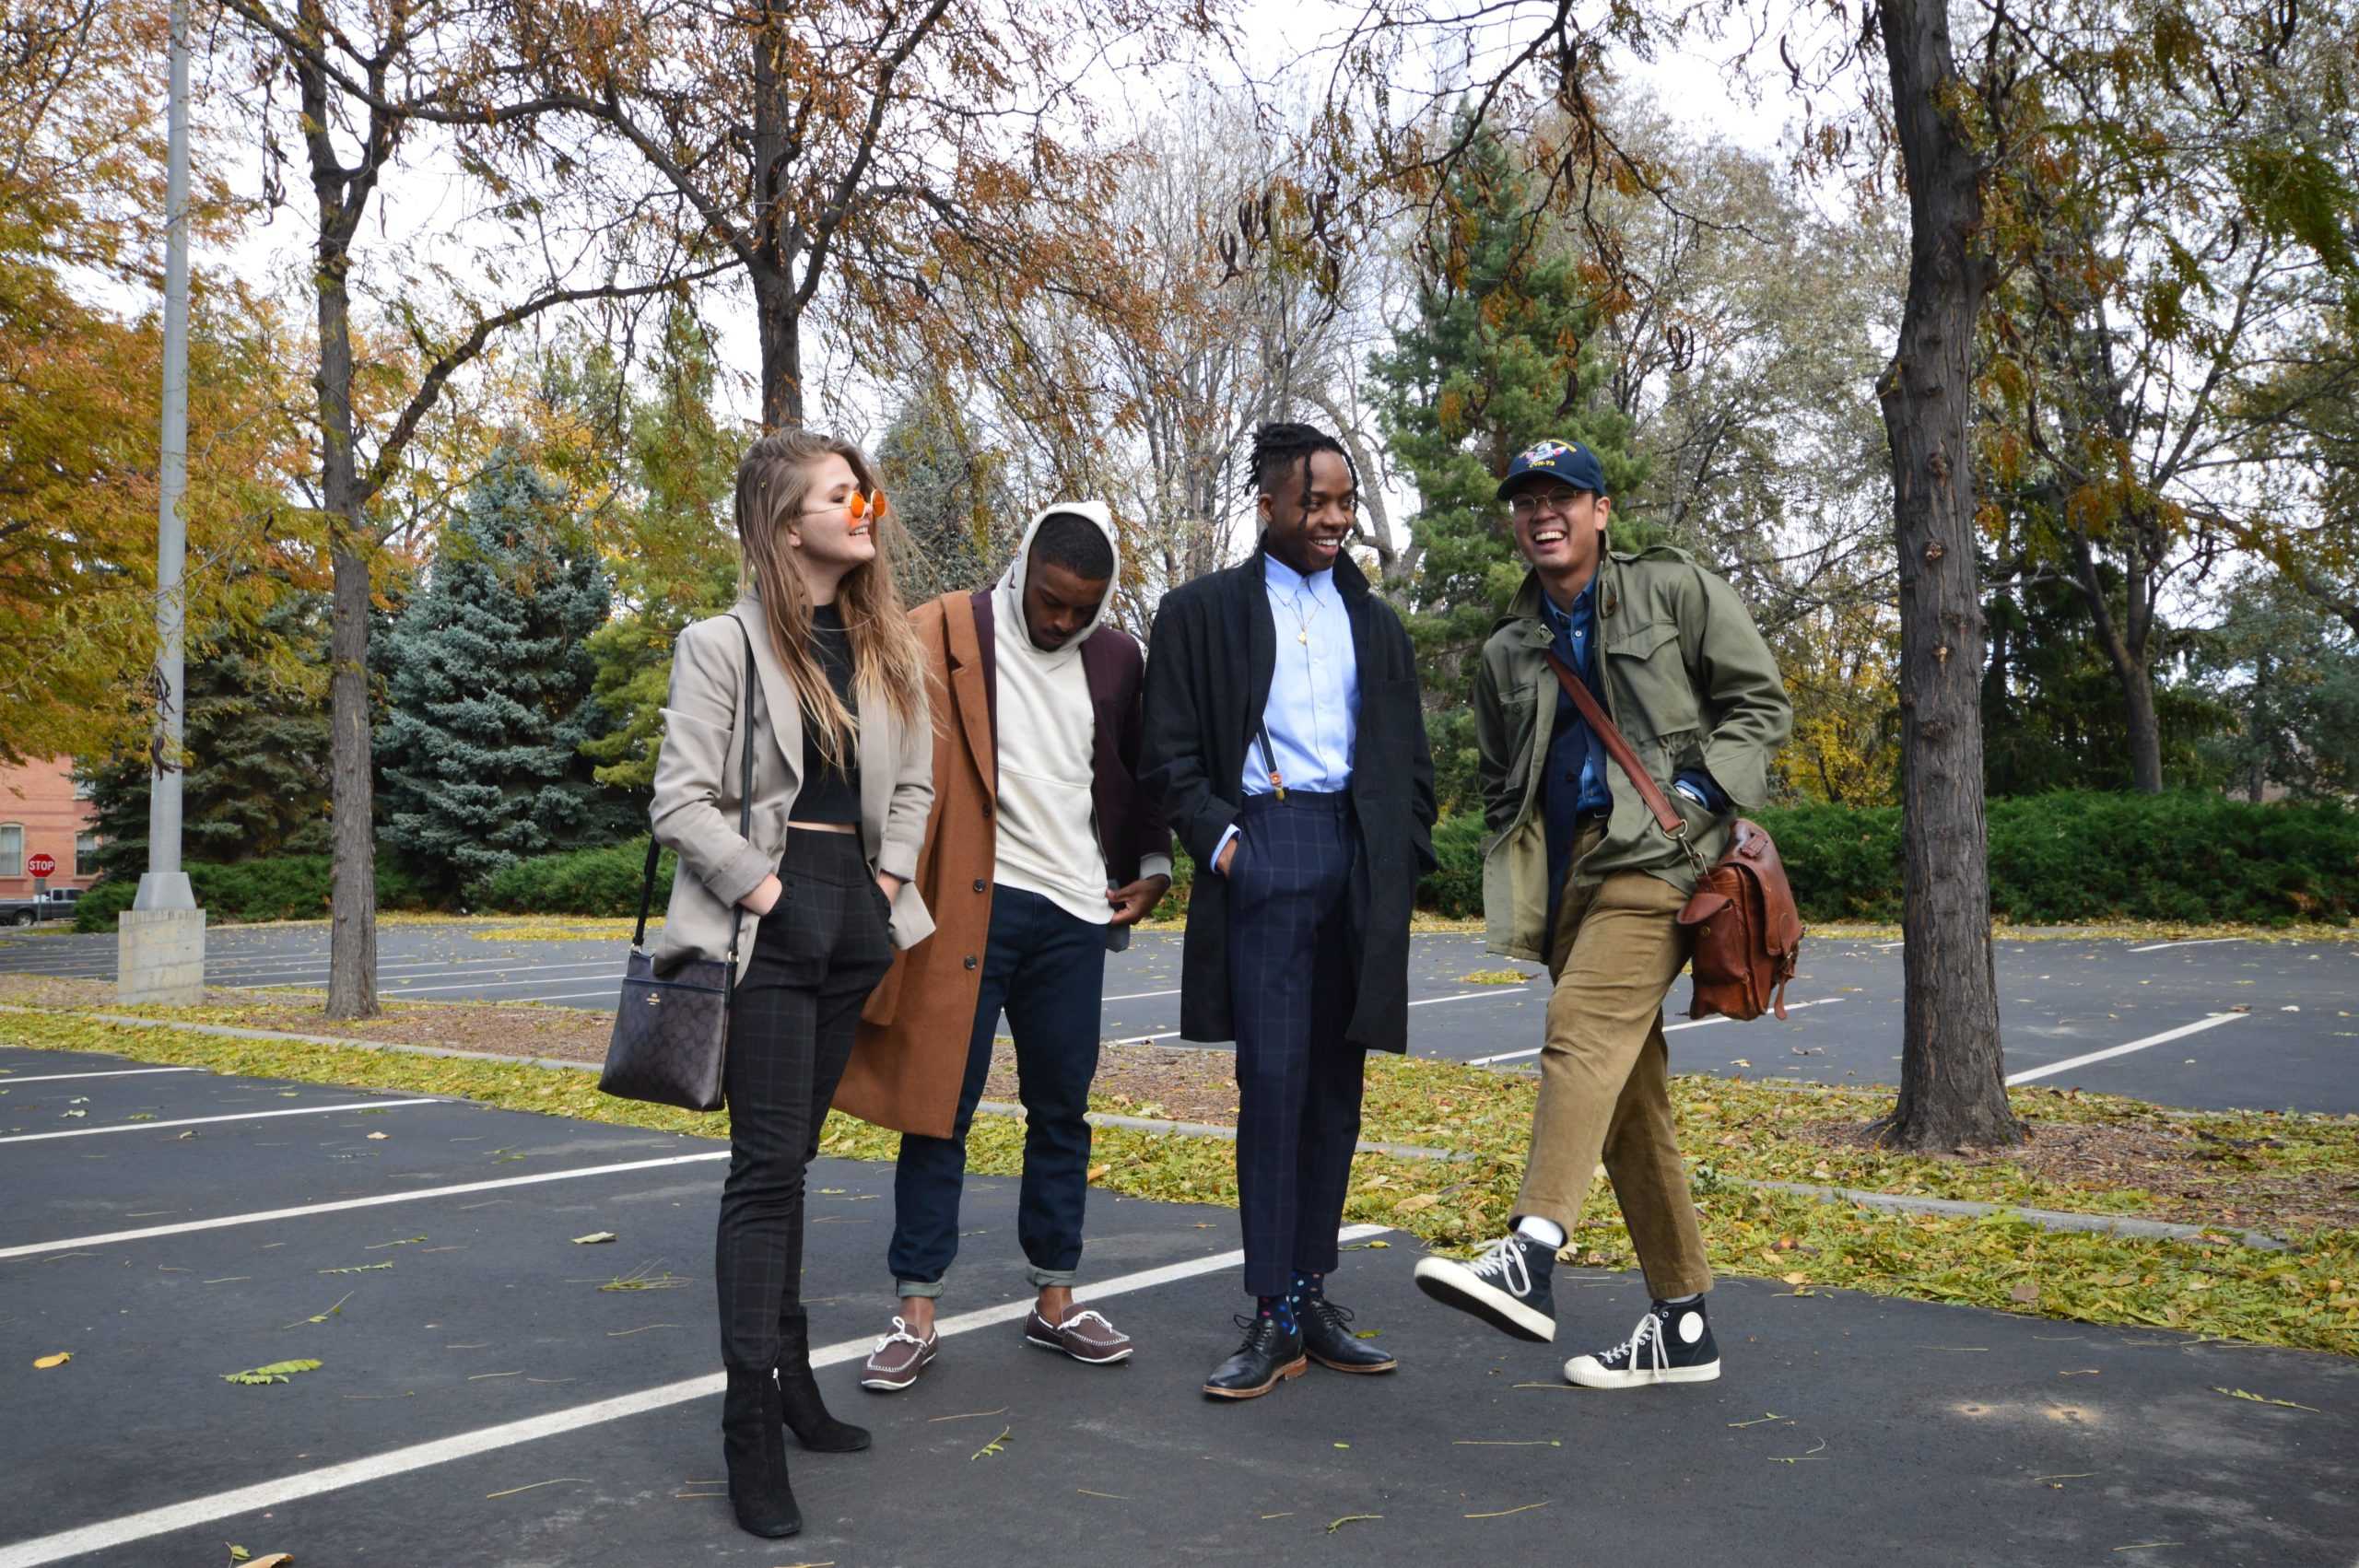 Four people, one white woman, two black men, and one Filipino man, stand in a parking lot dressed in fashionable Ivy style